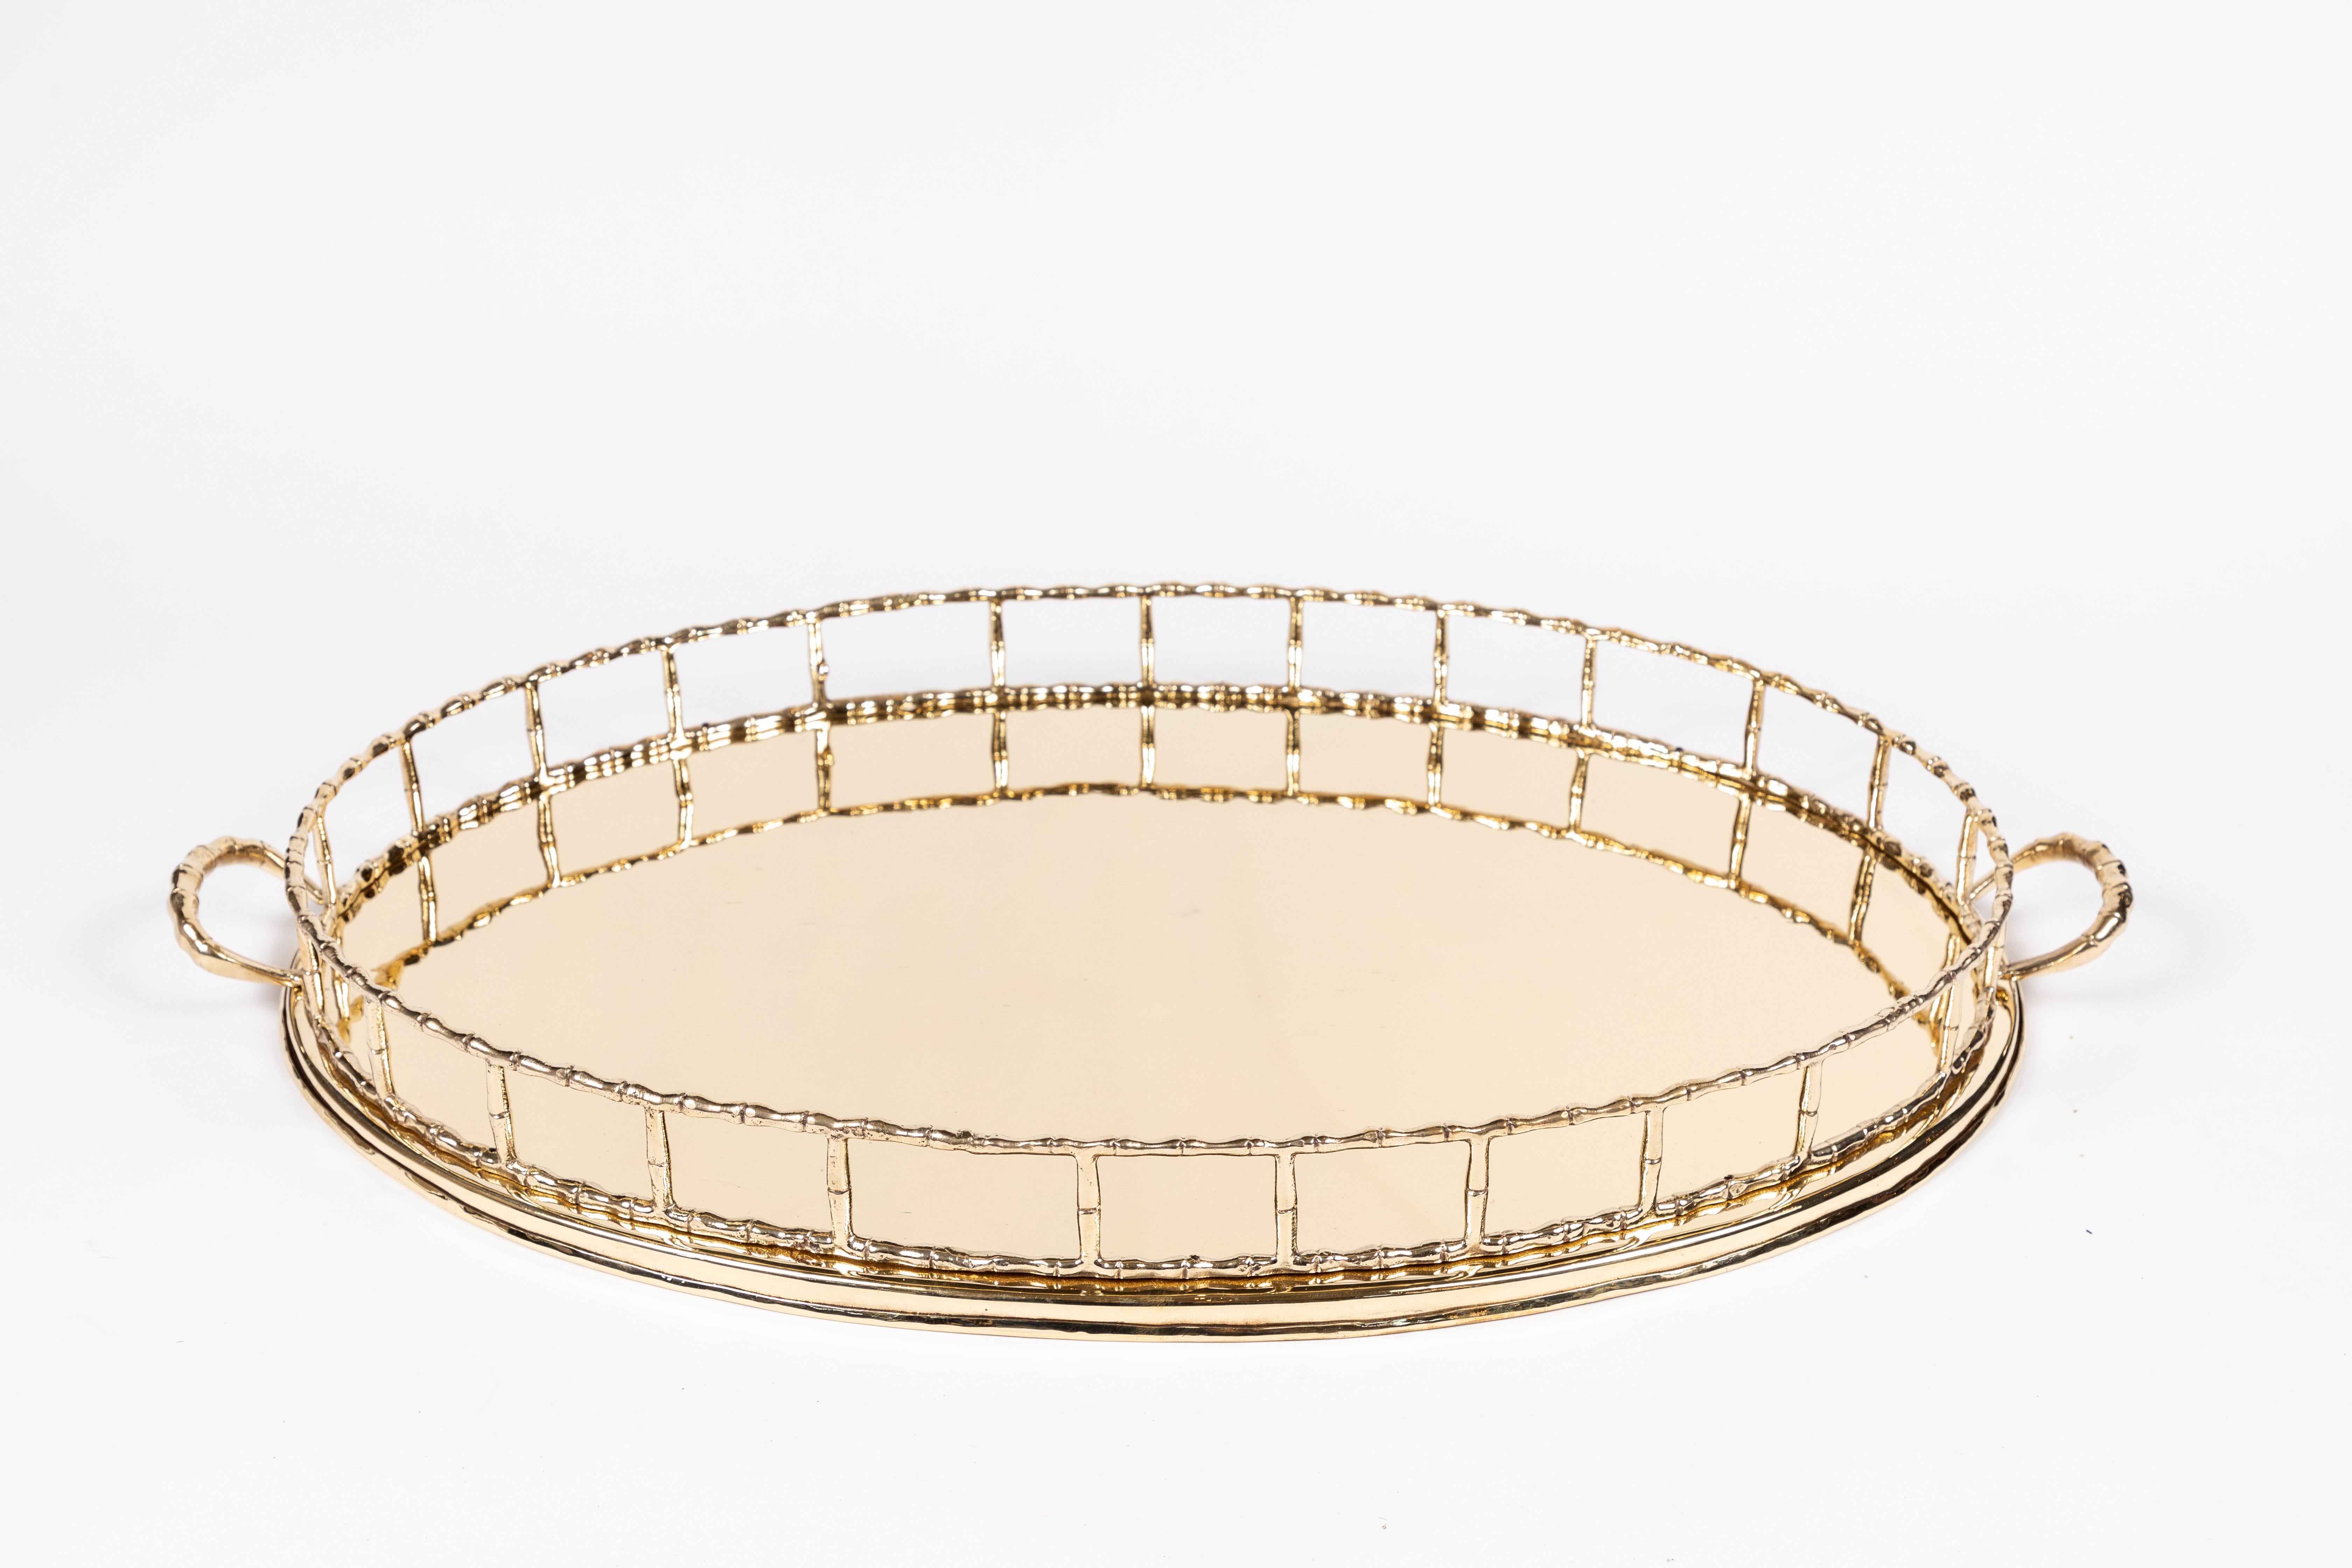 Oversized vintage oval brass tray with 'Bamboo' gallery rail and matching 'Bamboo' handles. This piece has been newly polished and is ready for display or service. Measures: 27